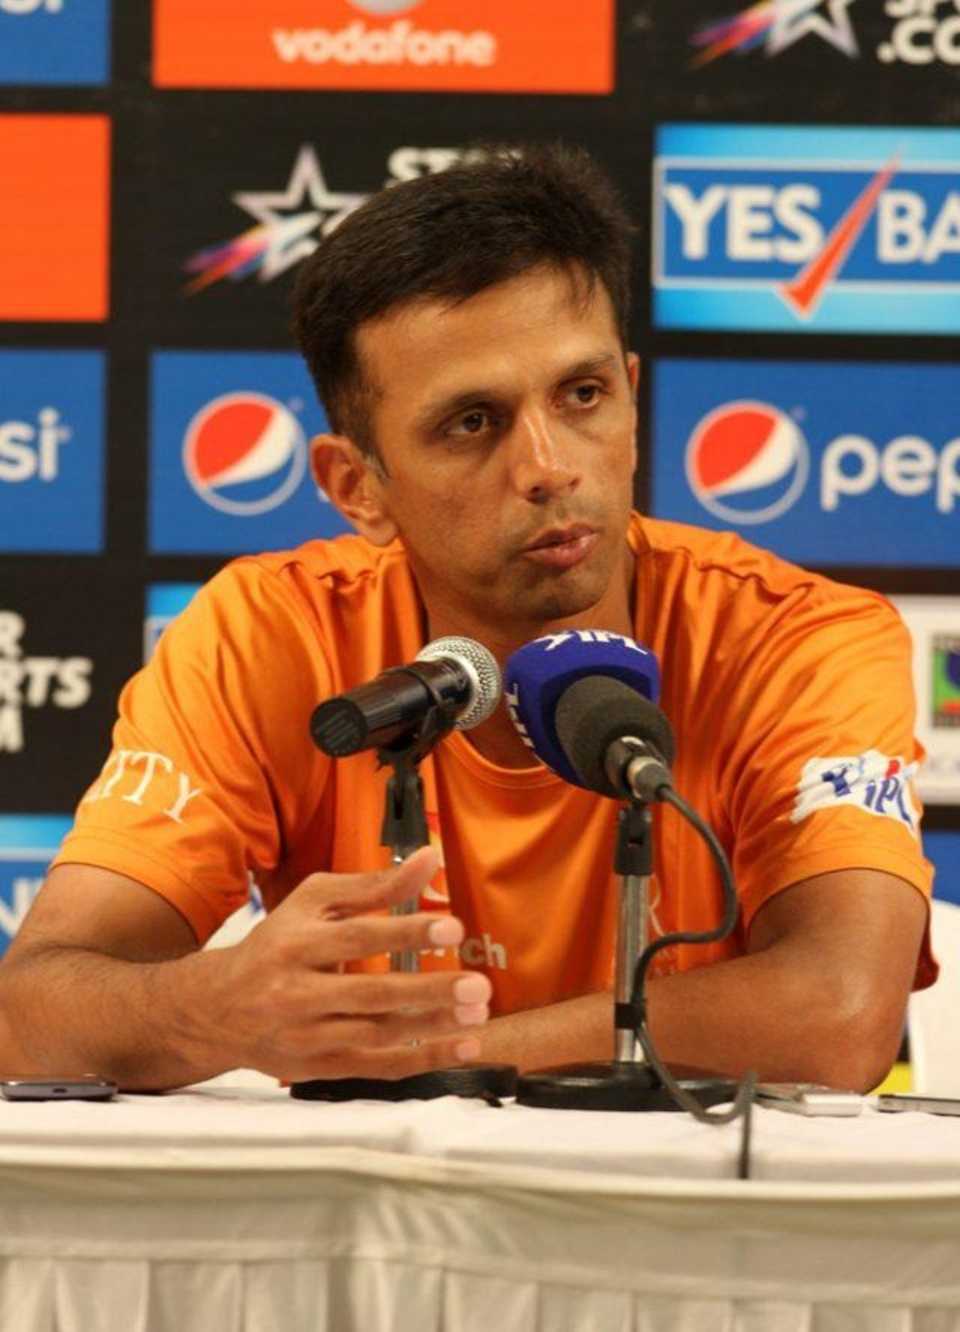 Rahul Dravid speaks to the media after Rajasthan Royals suffered a heartbreaking loss to Mumbai Indians on the final day of the IPL 2014 regular season, Mumbai Indians v Rajasthan Royals, IPL 2014, Mumbai, May 25, 2014